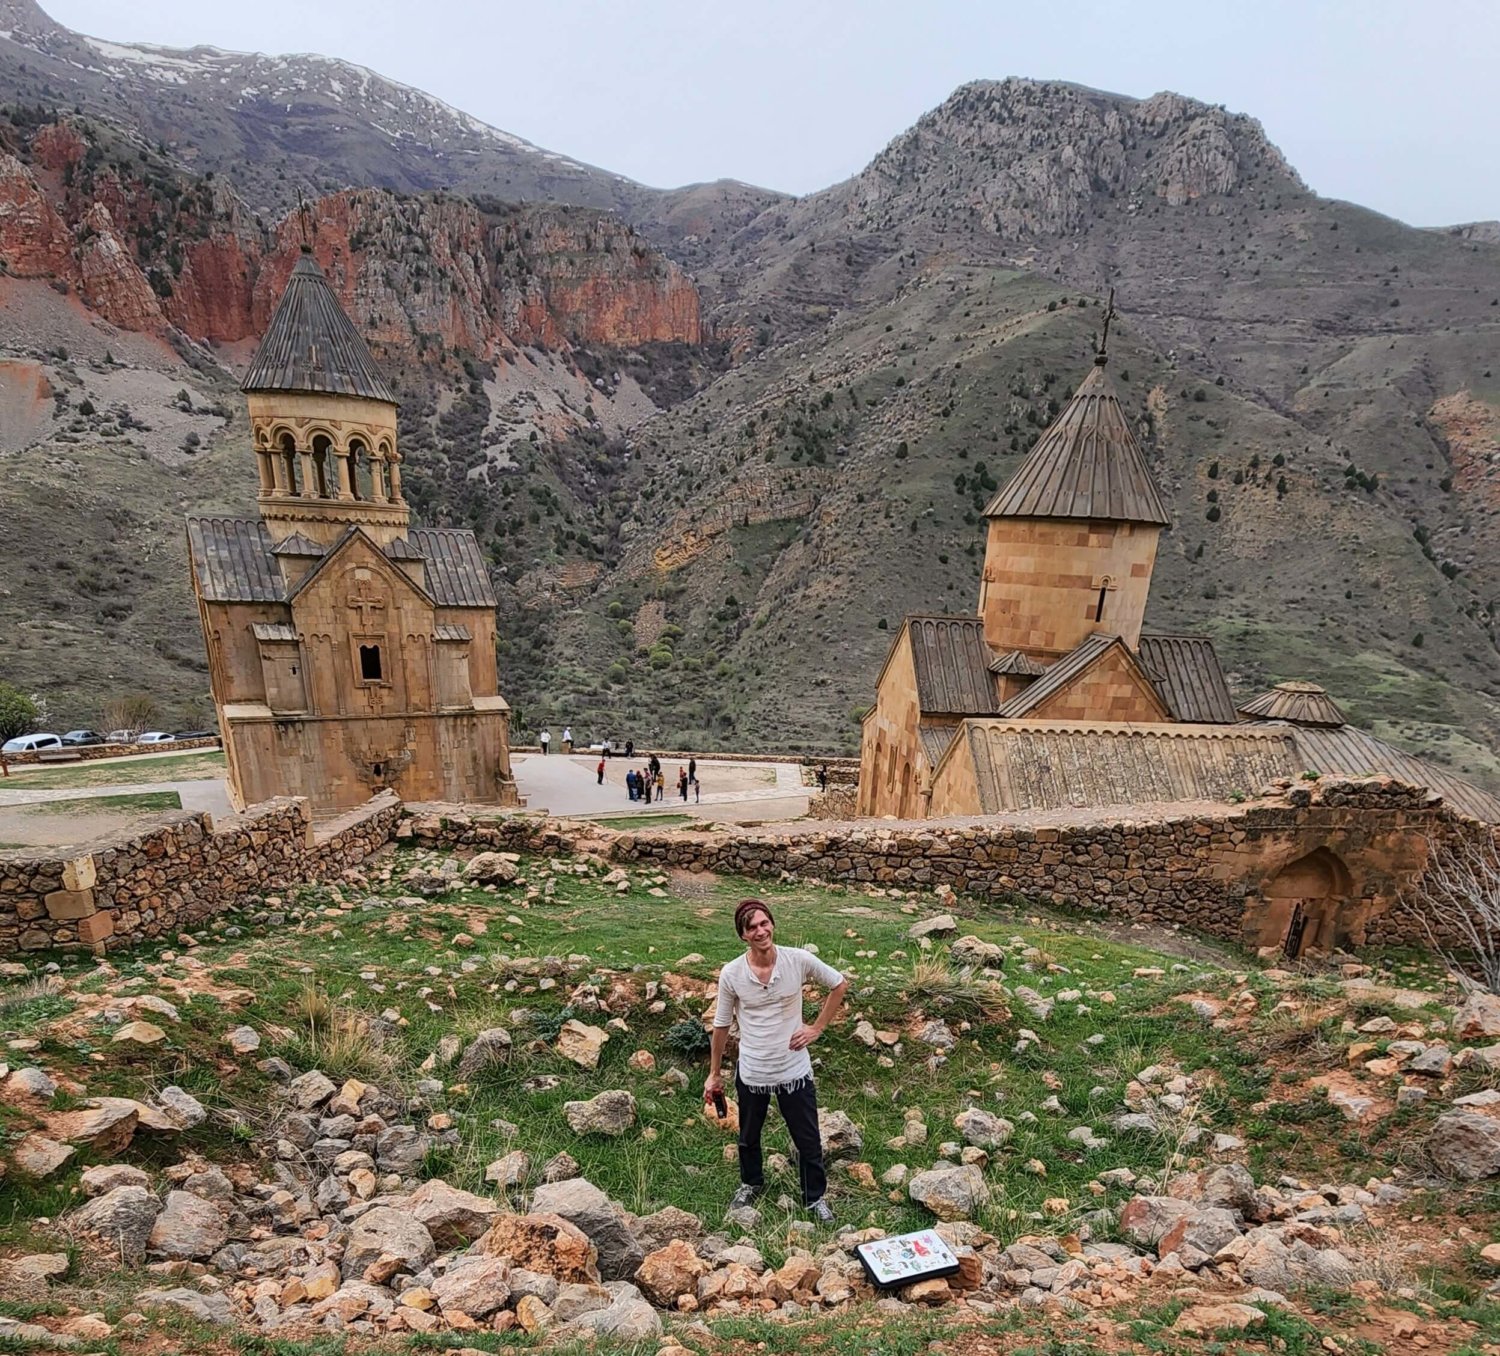 Ancient clerical buildings in front of a stunning mountainscape, and Ady in the foreground with some recording gear